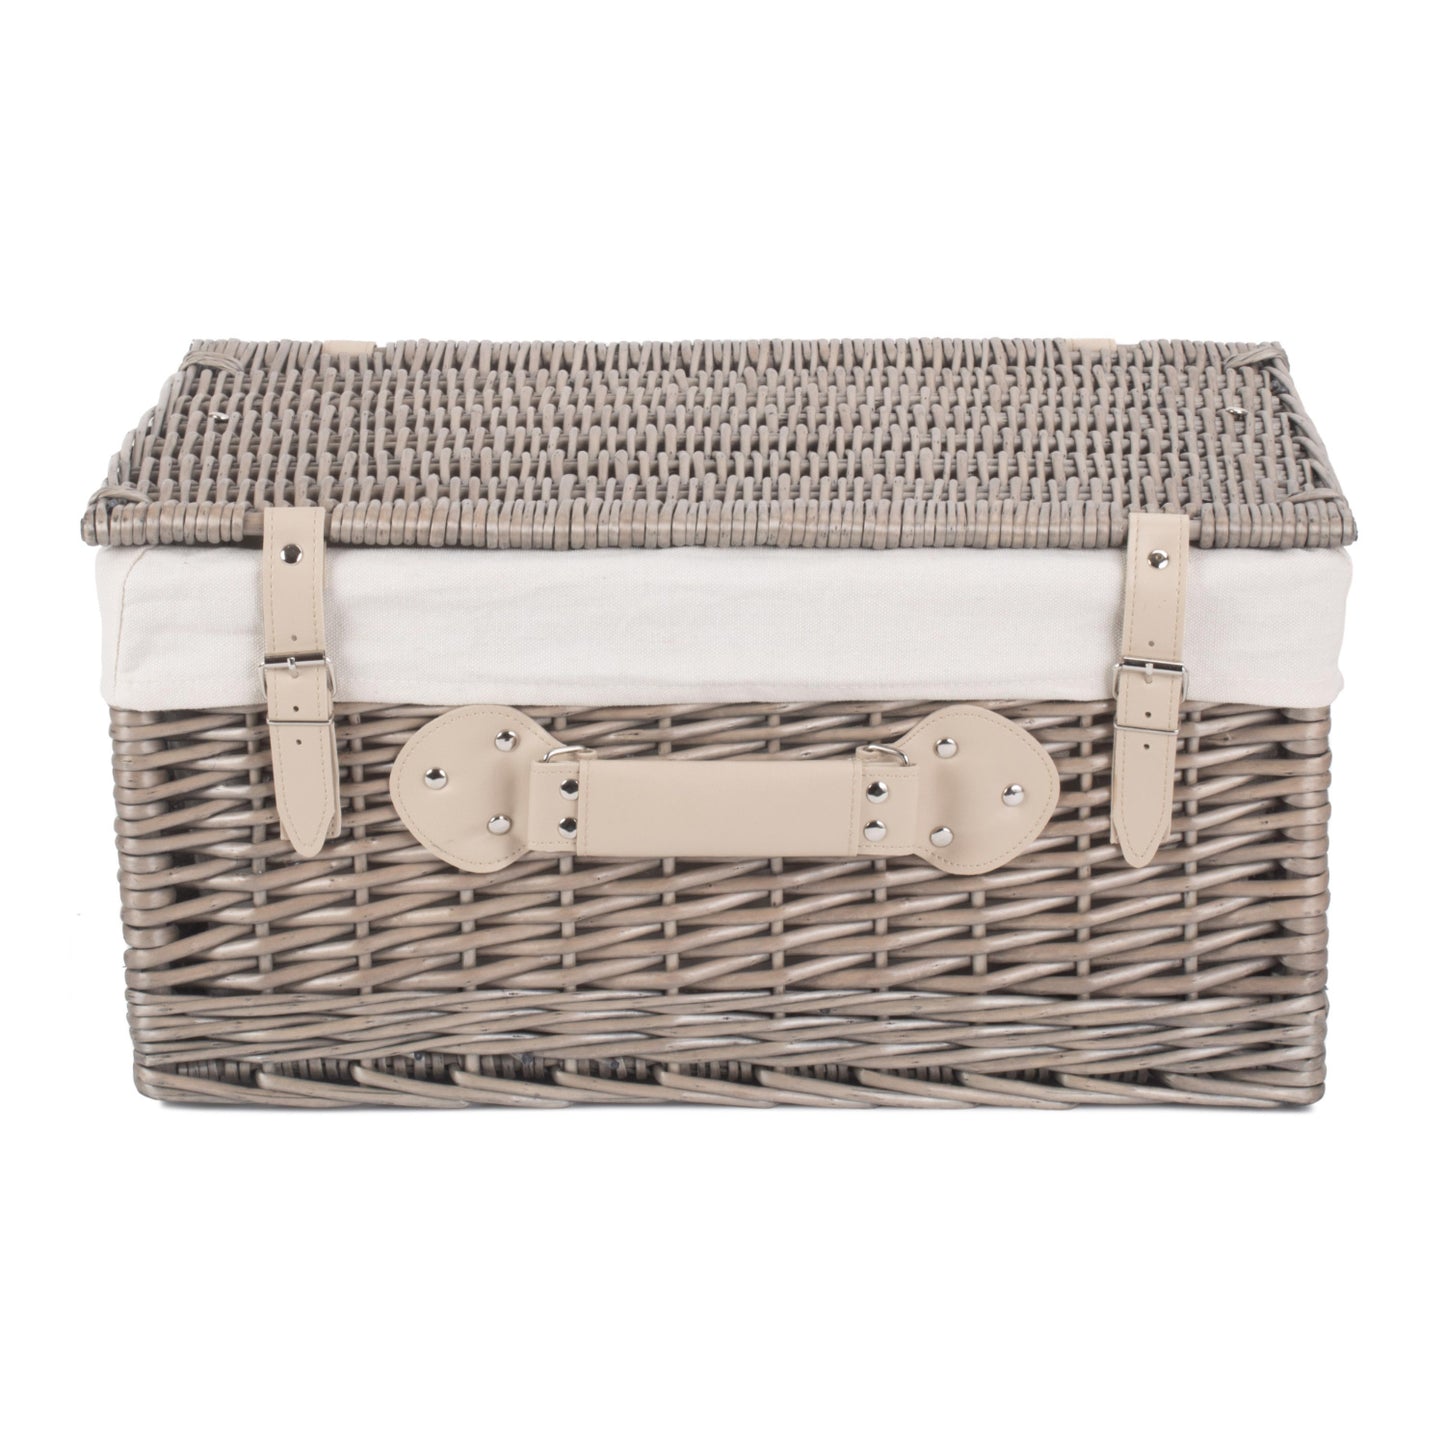 20 Inch Antique Wash Hamper With White Lining